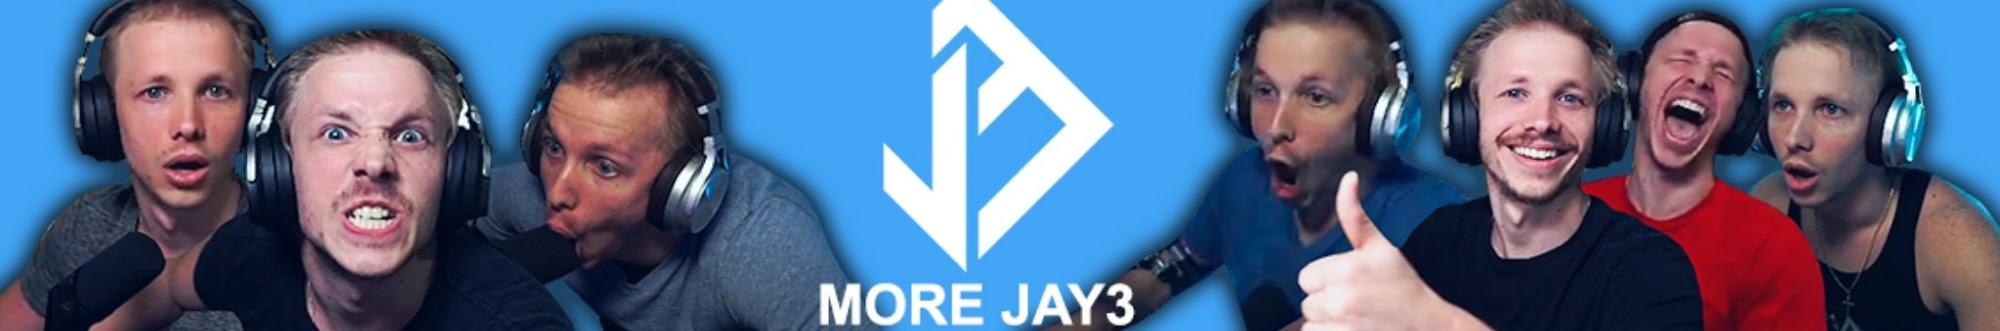 More Jay3